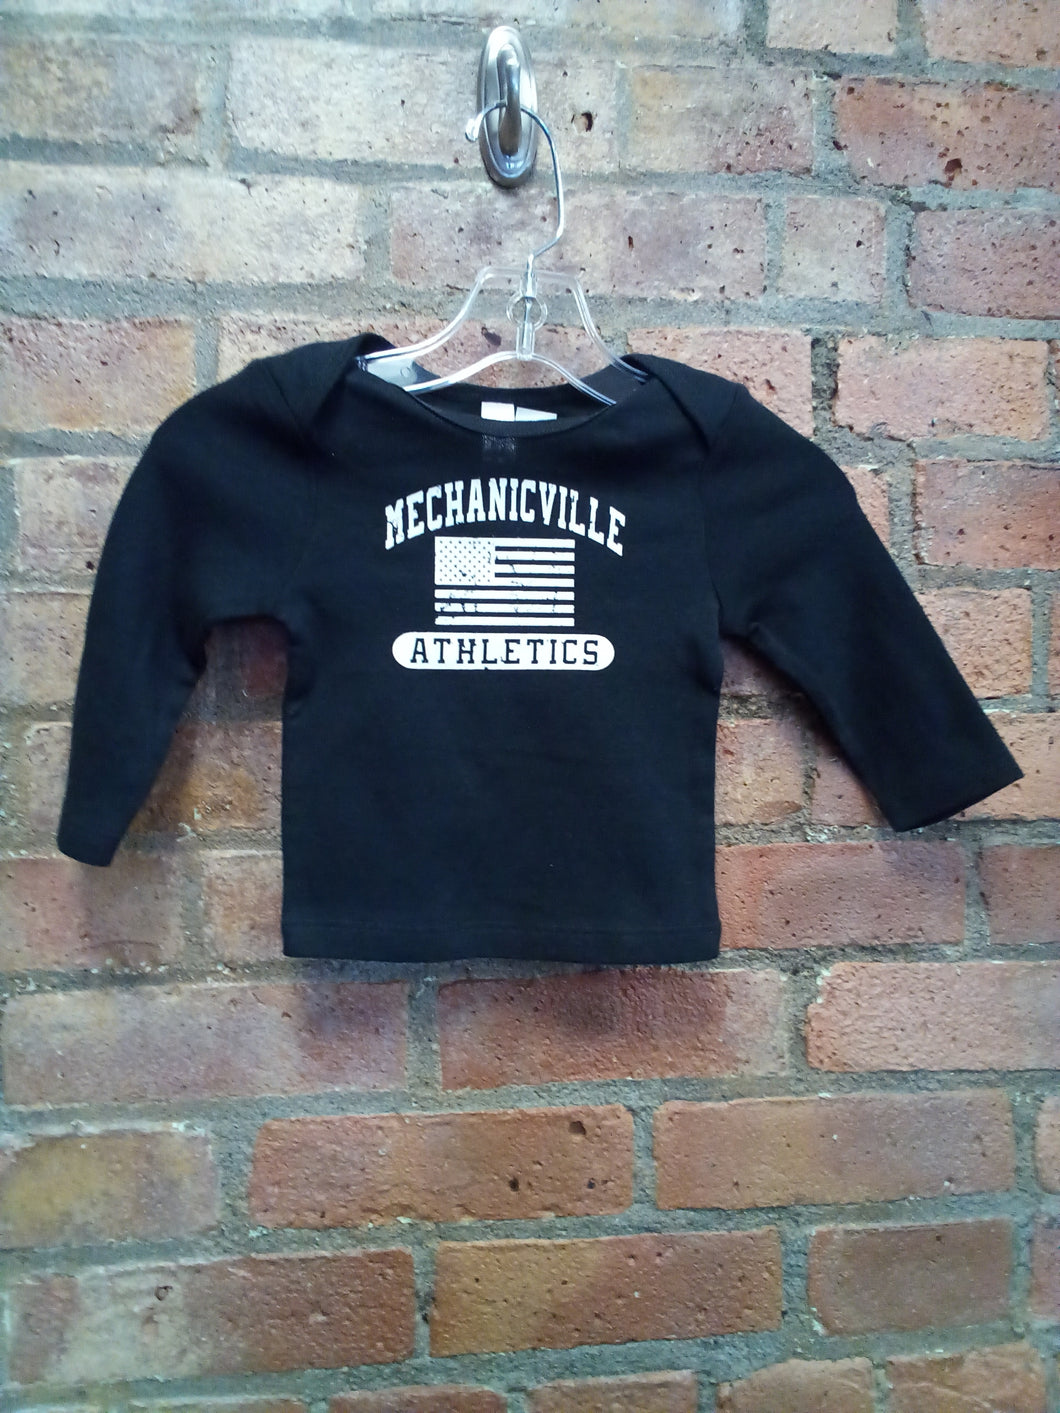 CLEARANCE - Mechanicville 6 Month Shirts - 6 Different Designs!